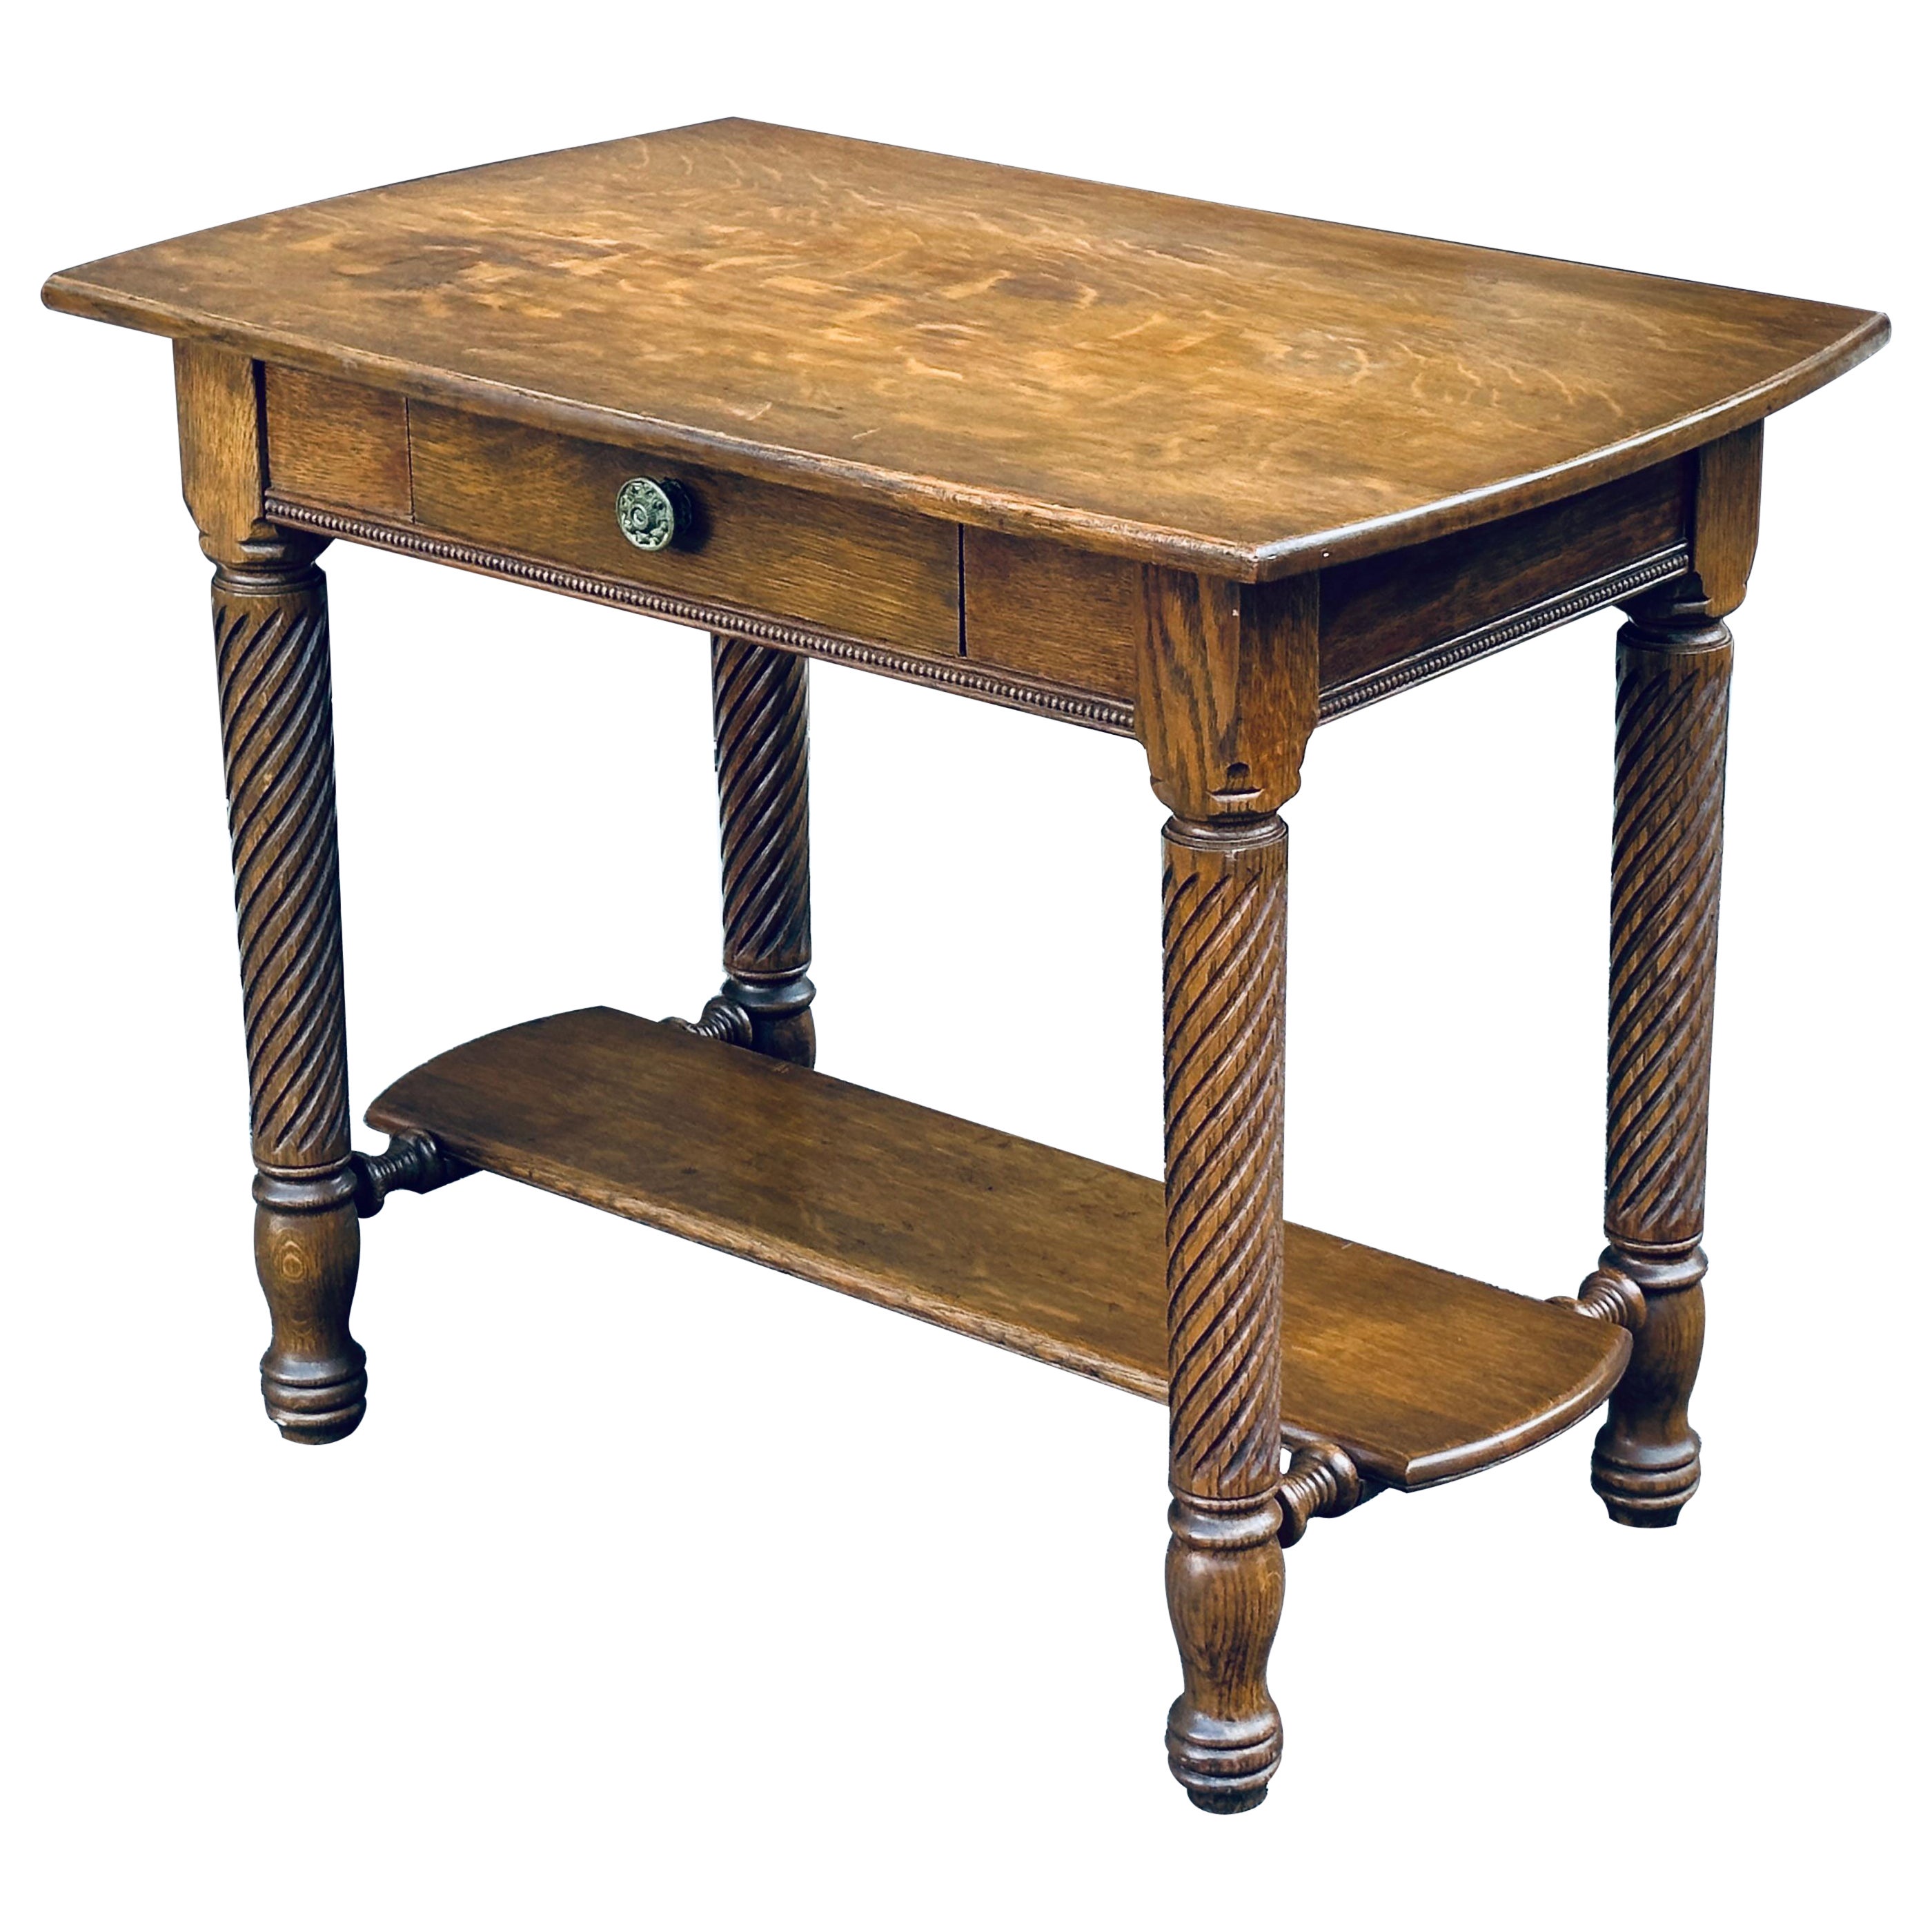 Antique Quartersawn Solid Oak Library Table With Twist Legs & Drawer For Sale